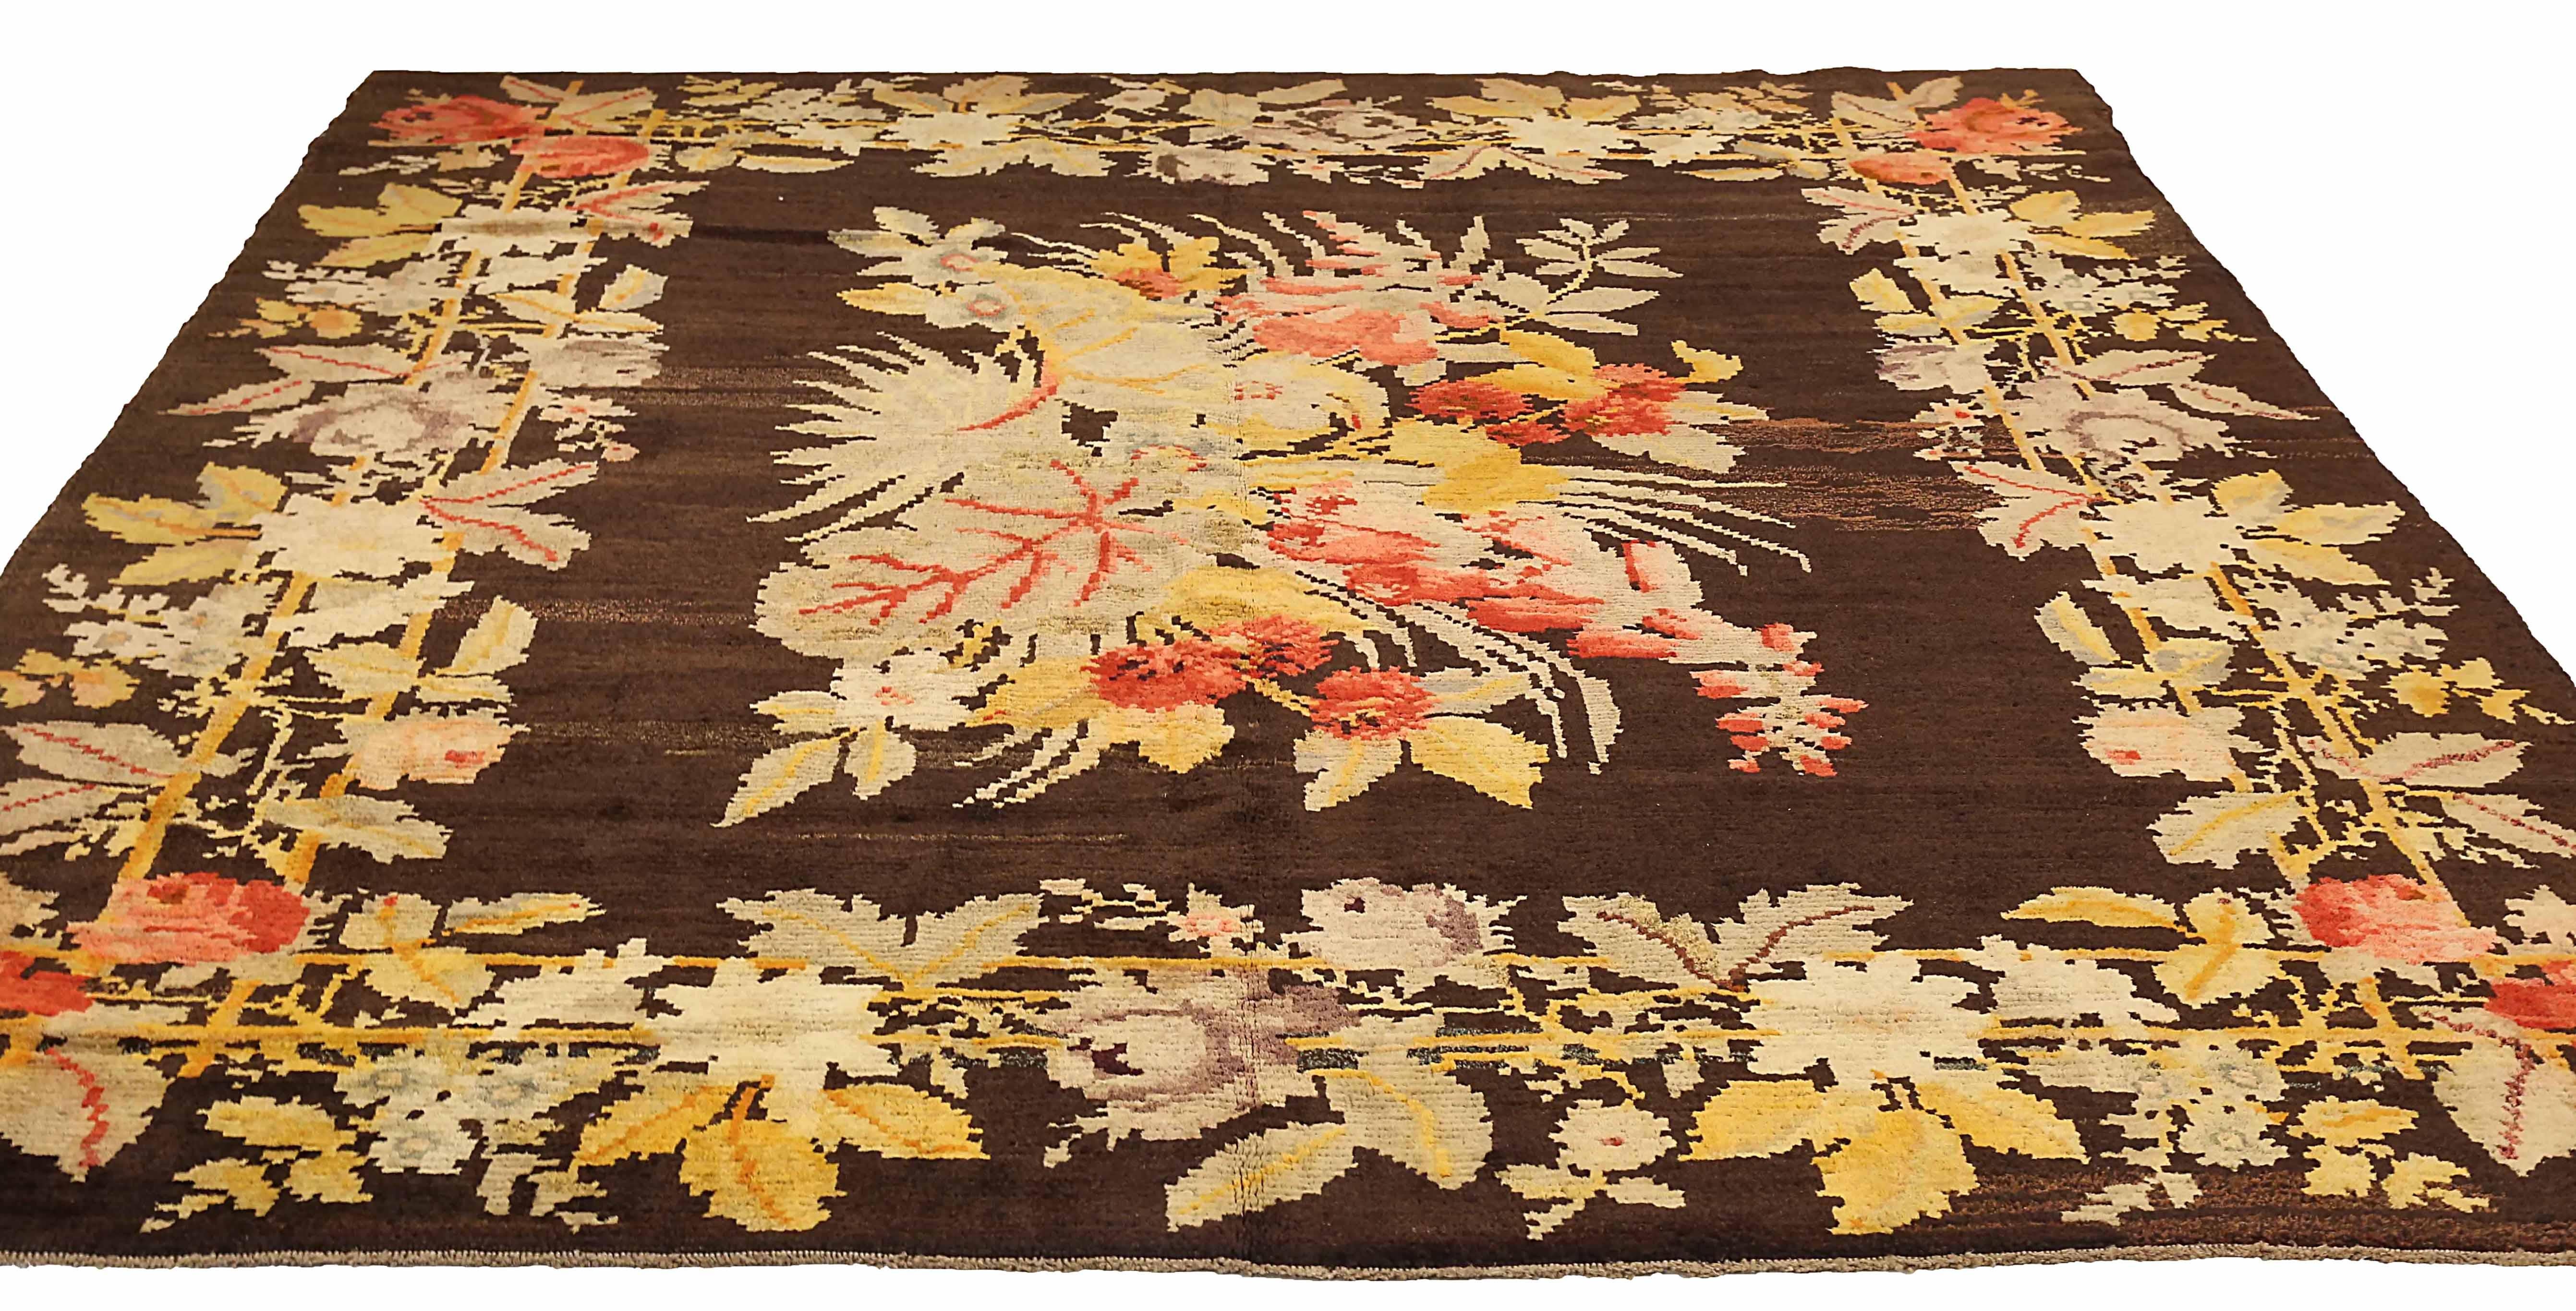 Antique European area rug handwoven from the finest sheep’s wool. It’s colored with all-natural vegetable dyes that are safe for humans and pets. It’s a traditional Bessarvian design handwoven by expert artisans. It’s a lovely area rug that can be